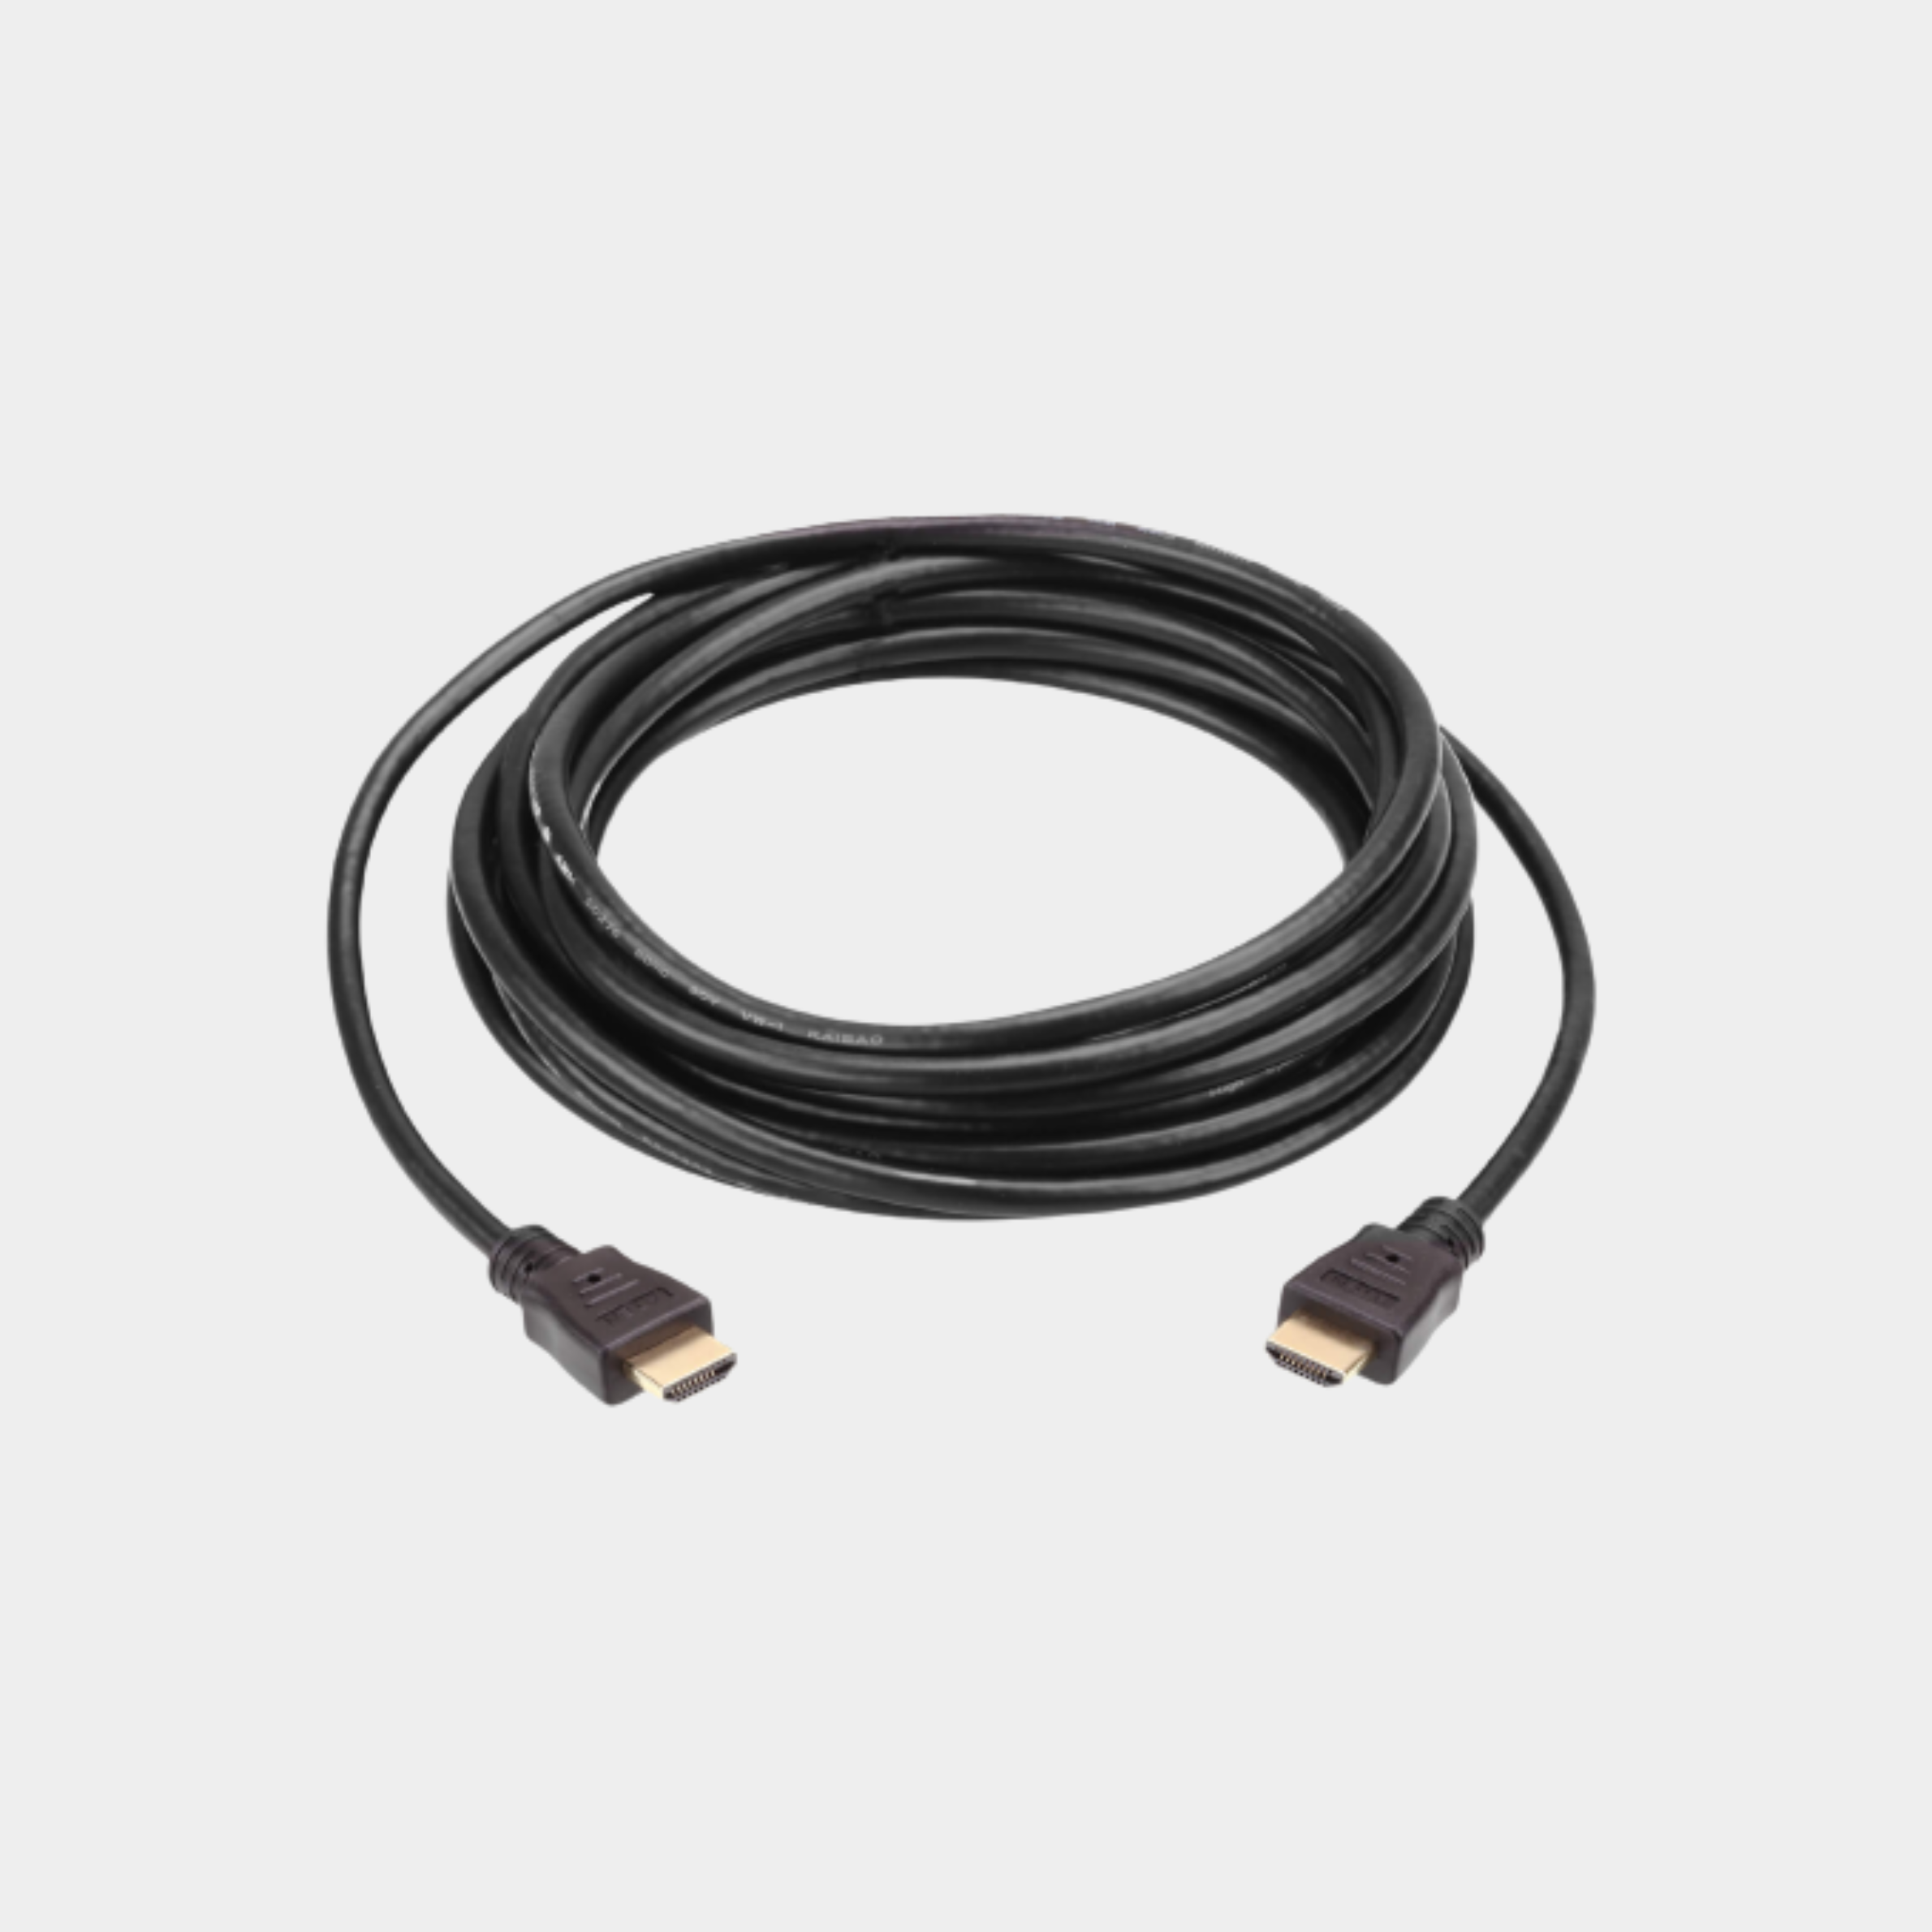 Aten 15 m High Speed HDMI Cable with Ethernet(ATEN 2L-7D15H)